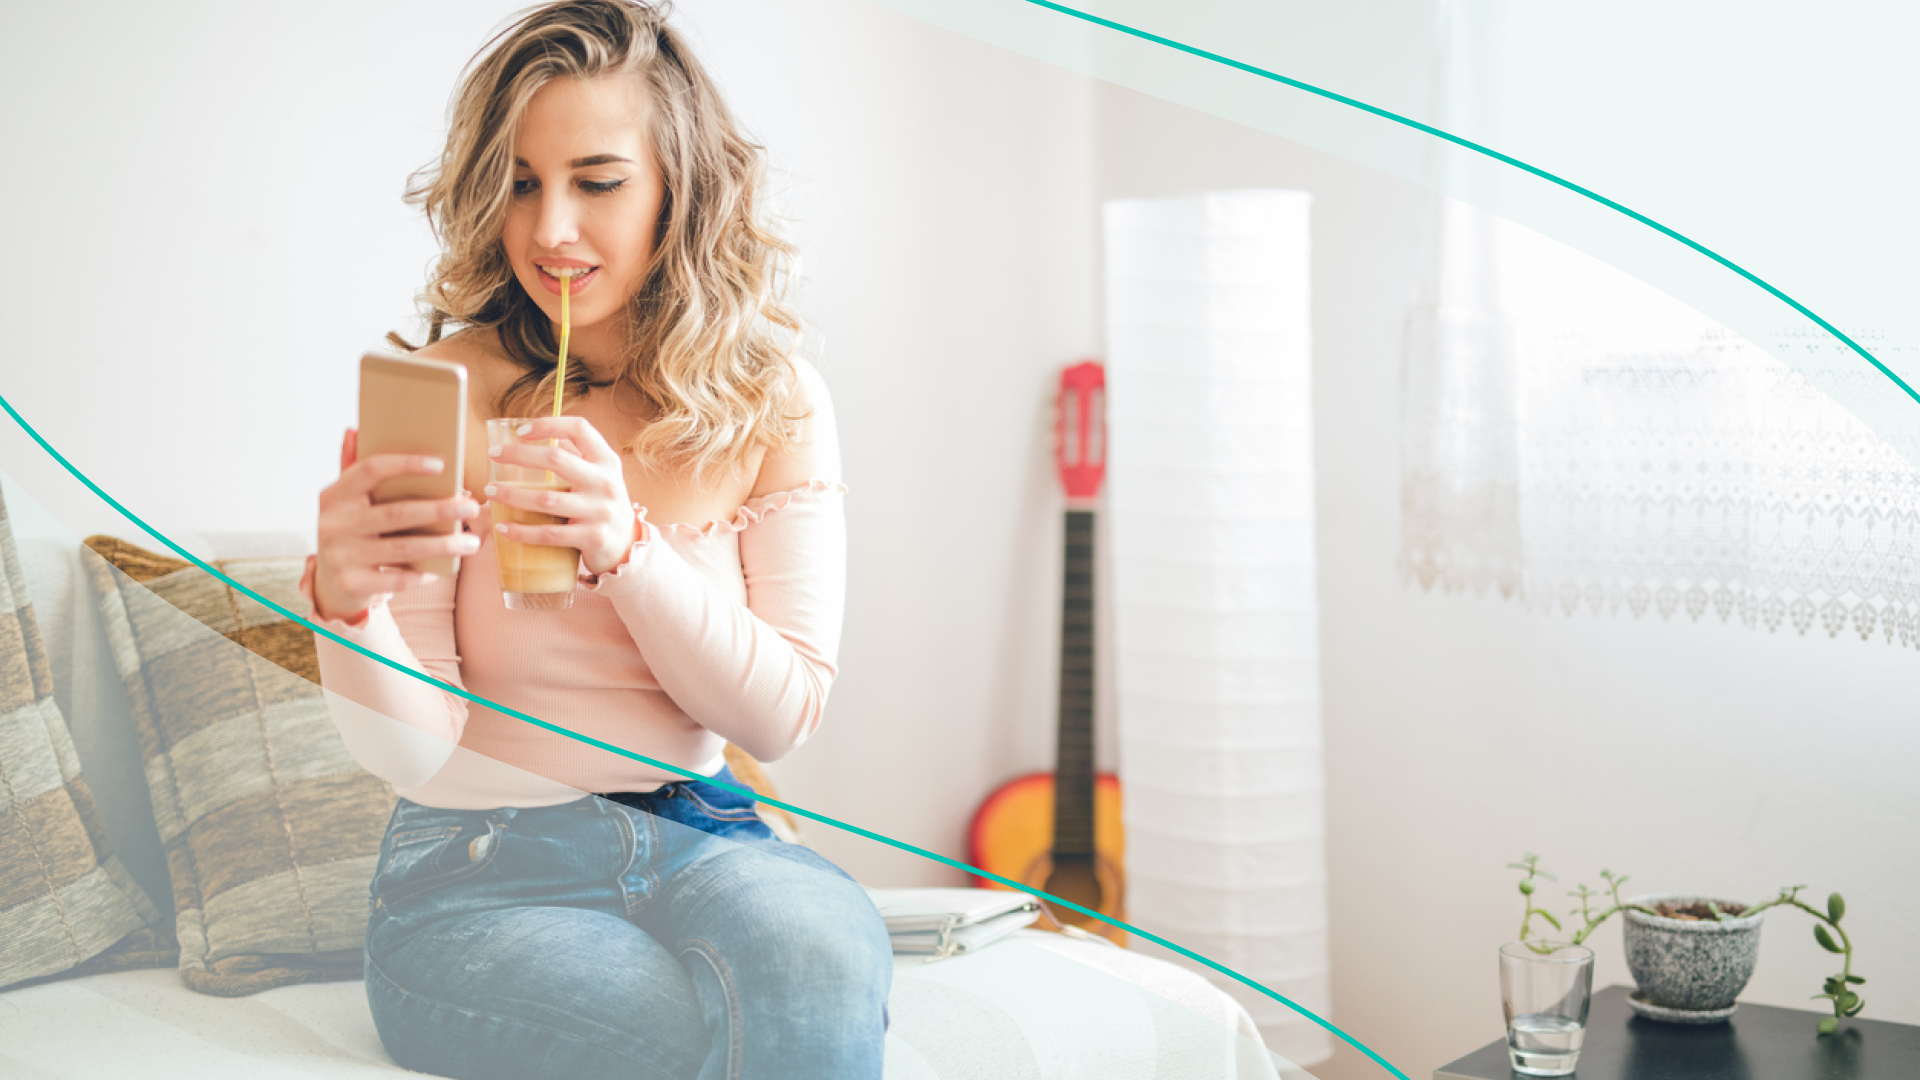 accessibility, woman viewing cell phone while drinking from a straw